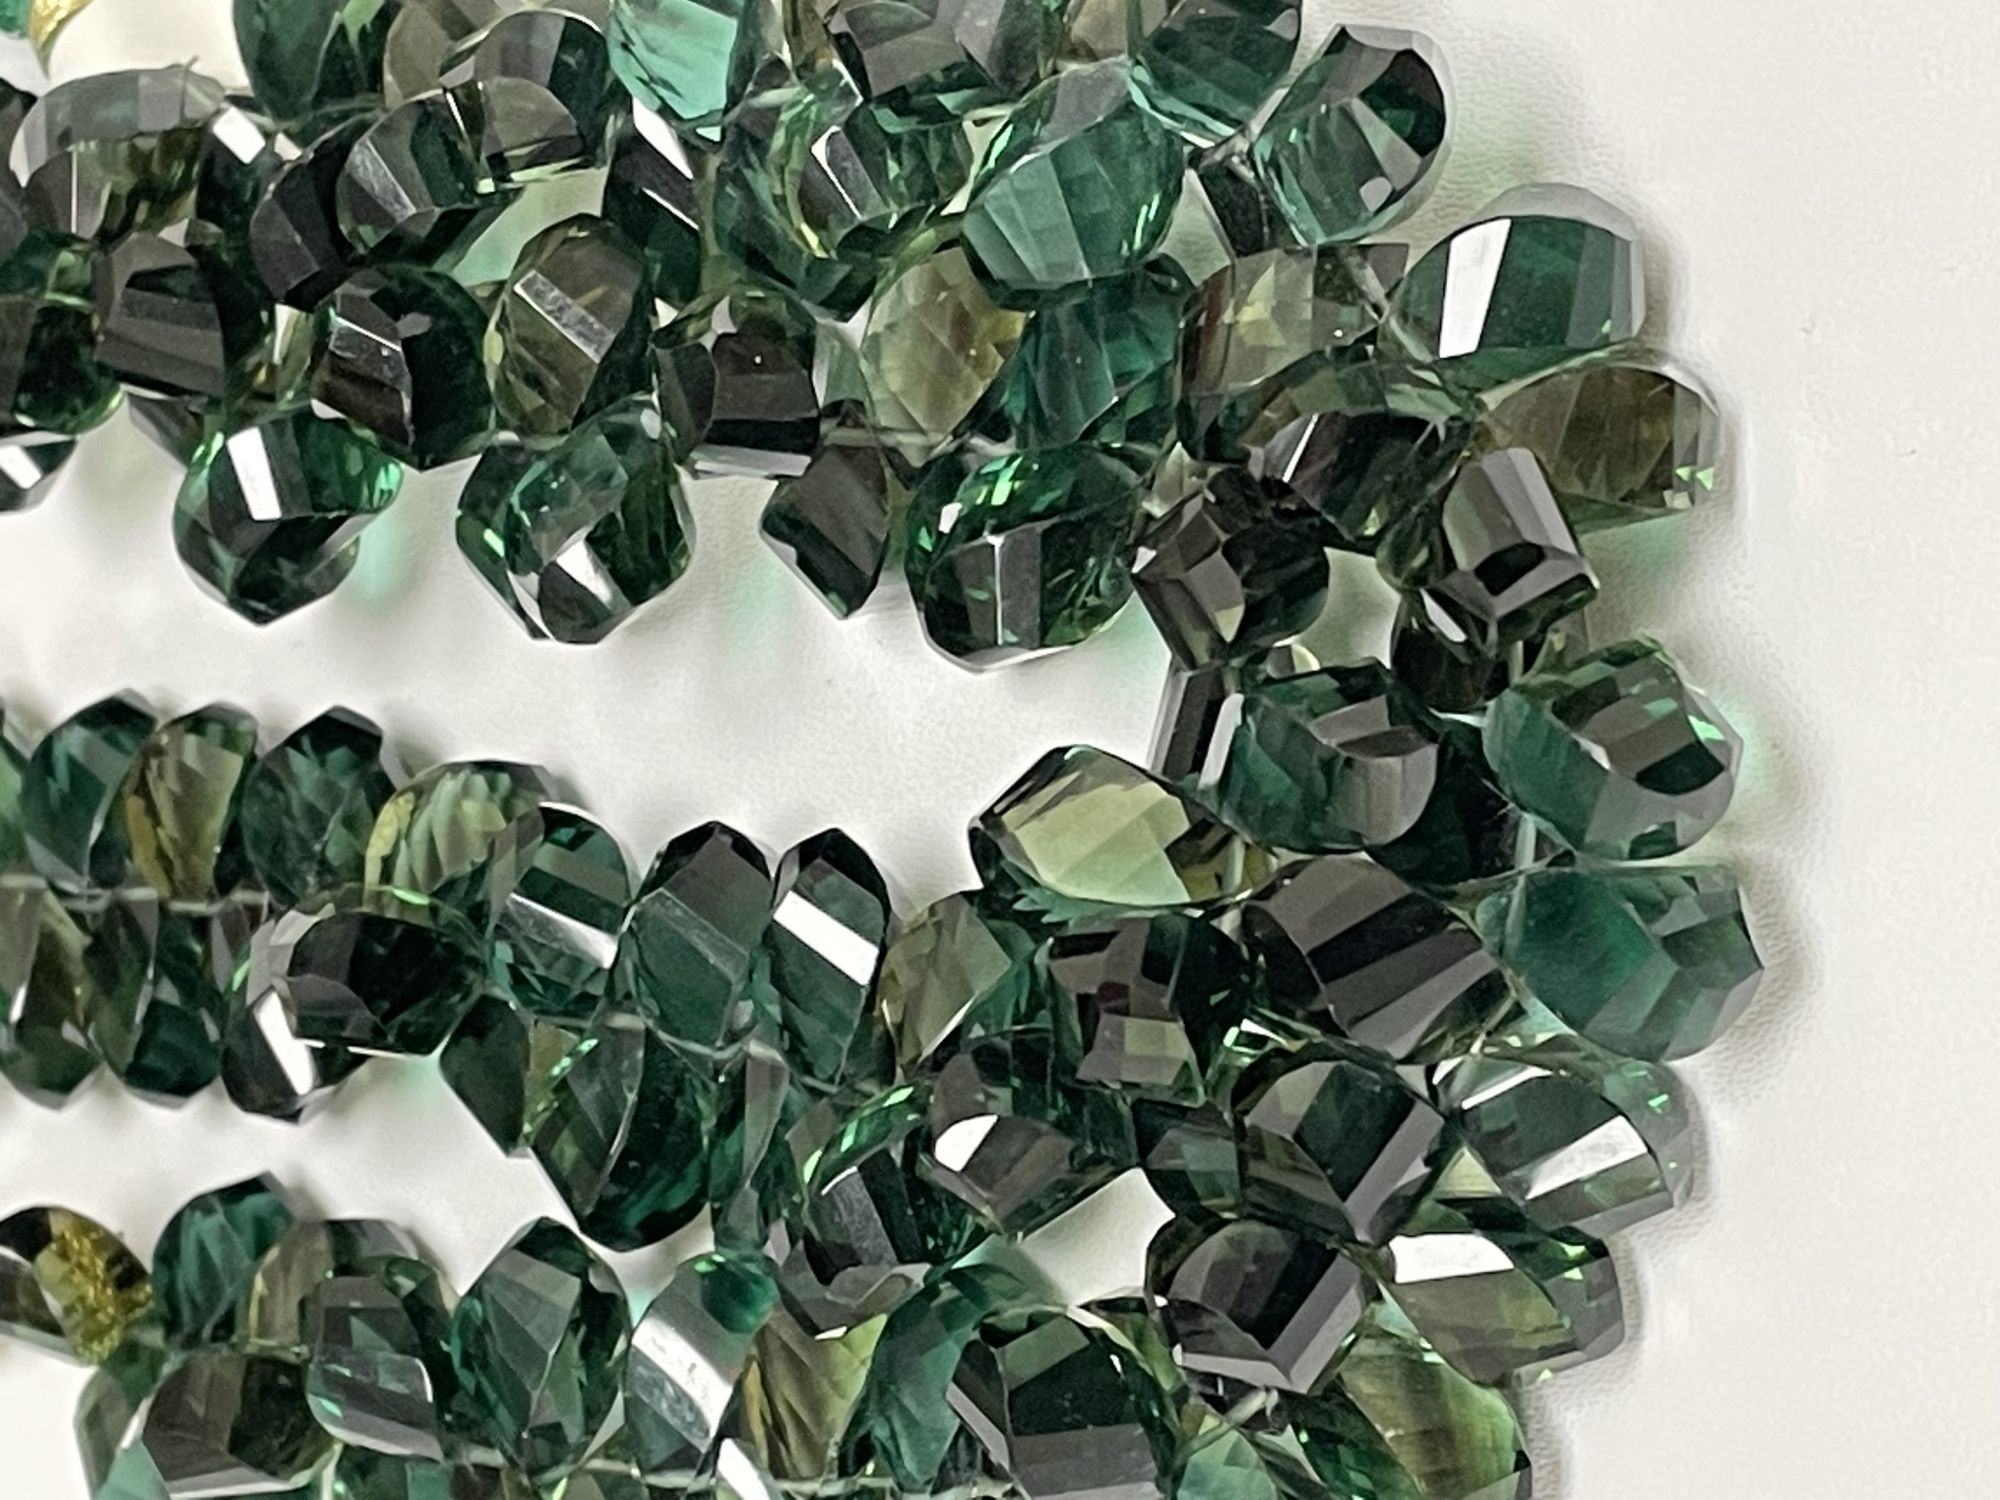 Green Hydro Quartz Twisted Drop Faceted